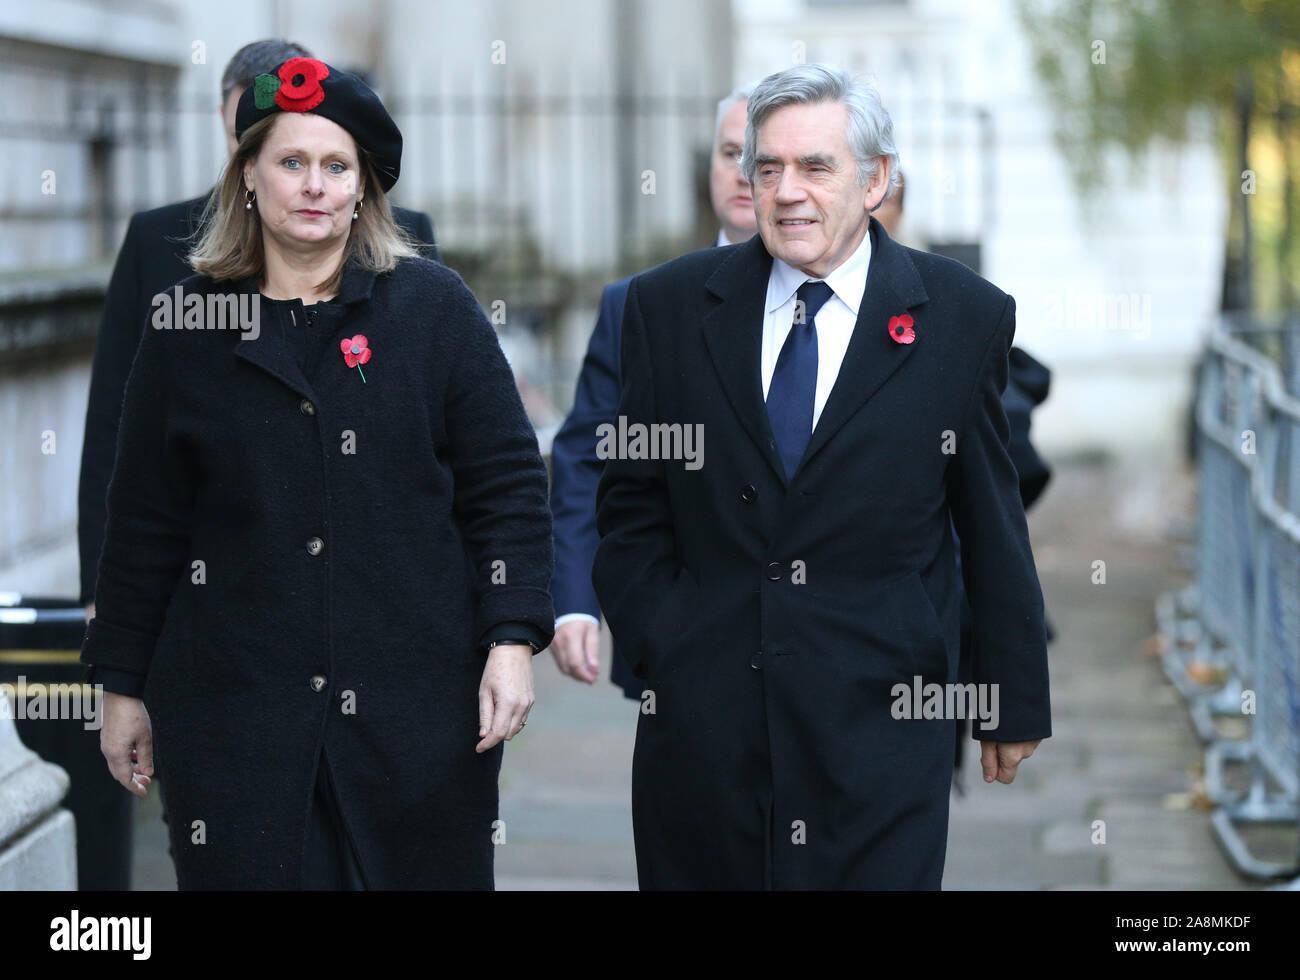 Former Prime Minister Gordon Brown and wife Sarah in Downing Street arriving for the Remembrance Sunday service at the Cenotaph memorial in Whitehall, central London. PA Photo. Picture date: Sunday November 10, 2019. See PA story ROYAL Remembrance. Photo credit should read: Jonathan Brady/PA Wire Stock Photo